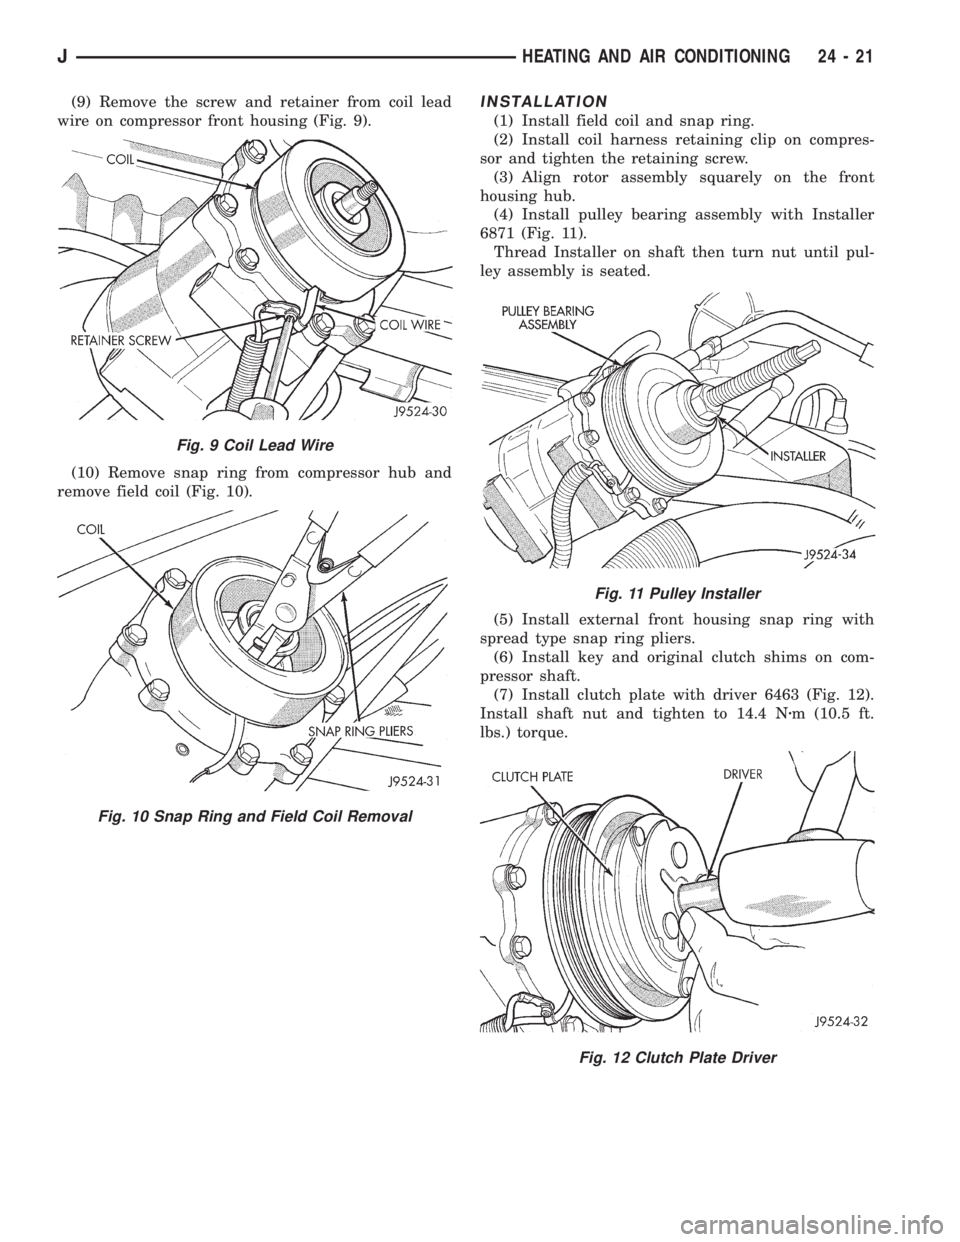 JEEP WRANGLER 1995  Owners Manual Fig. 10 Snap Ring and Field Coil Removal
Fig. 11 Pulley Installer
Fig. 12 Clutch Plate Driver
JHEATING AND AIR CONDITIONING 24 - 21 